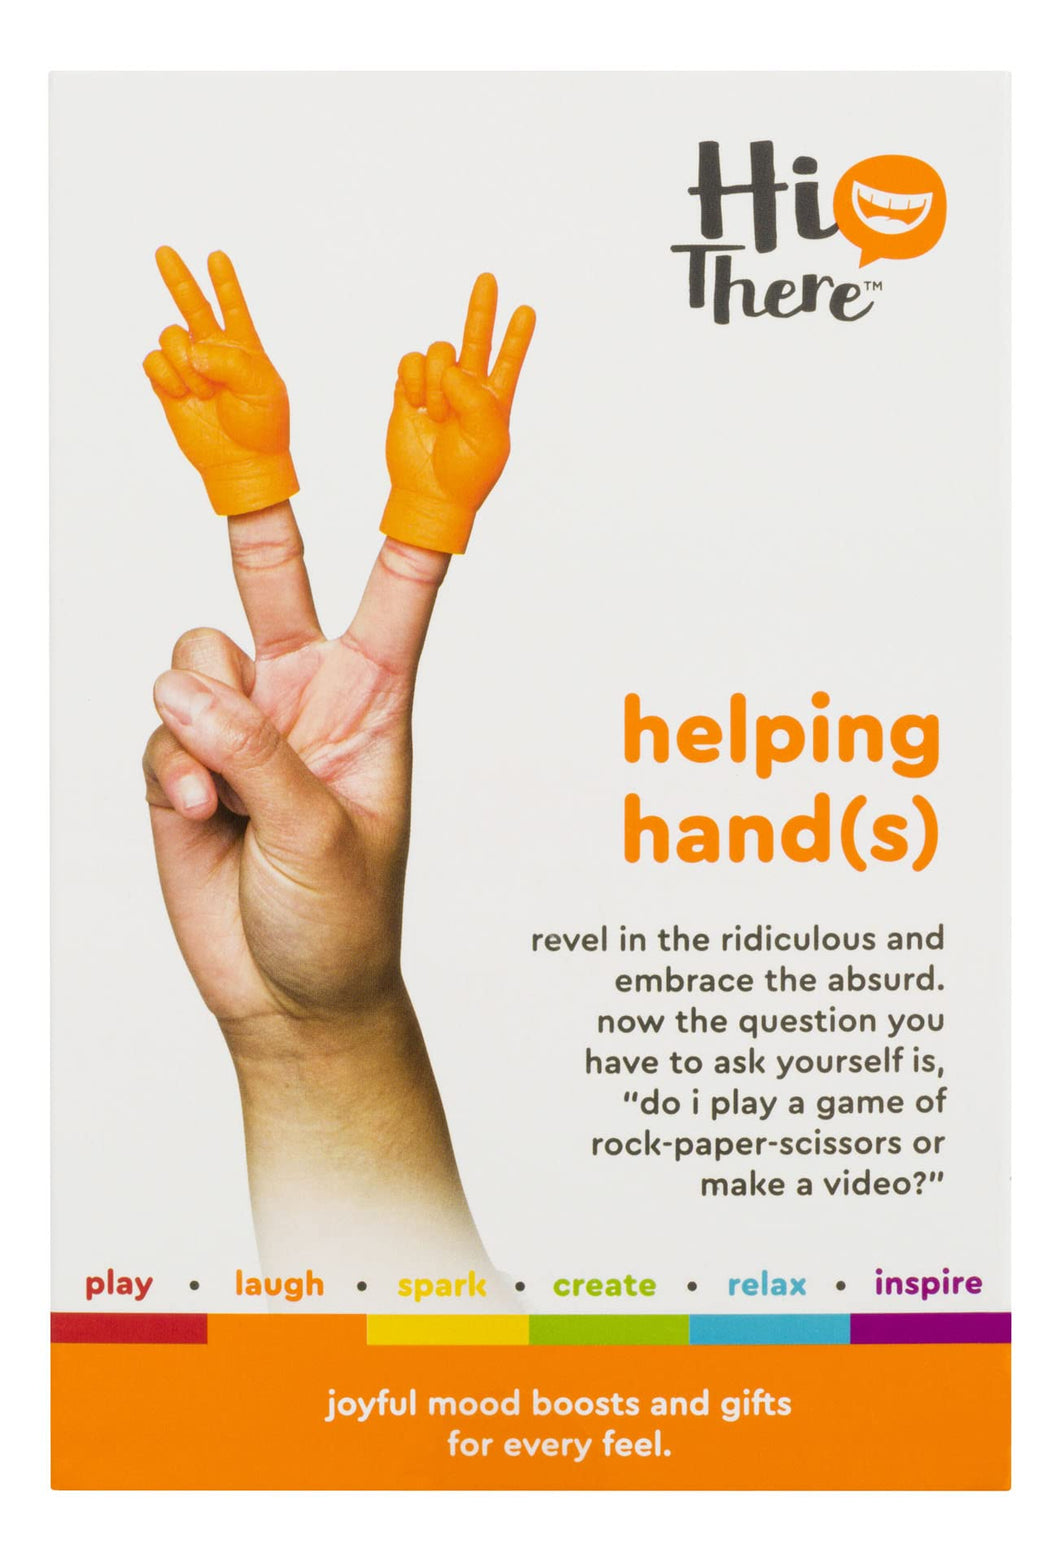 Image of the “Helping Hands” Mini Finger Hands retail packaging.